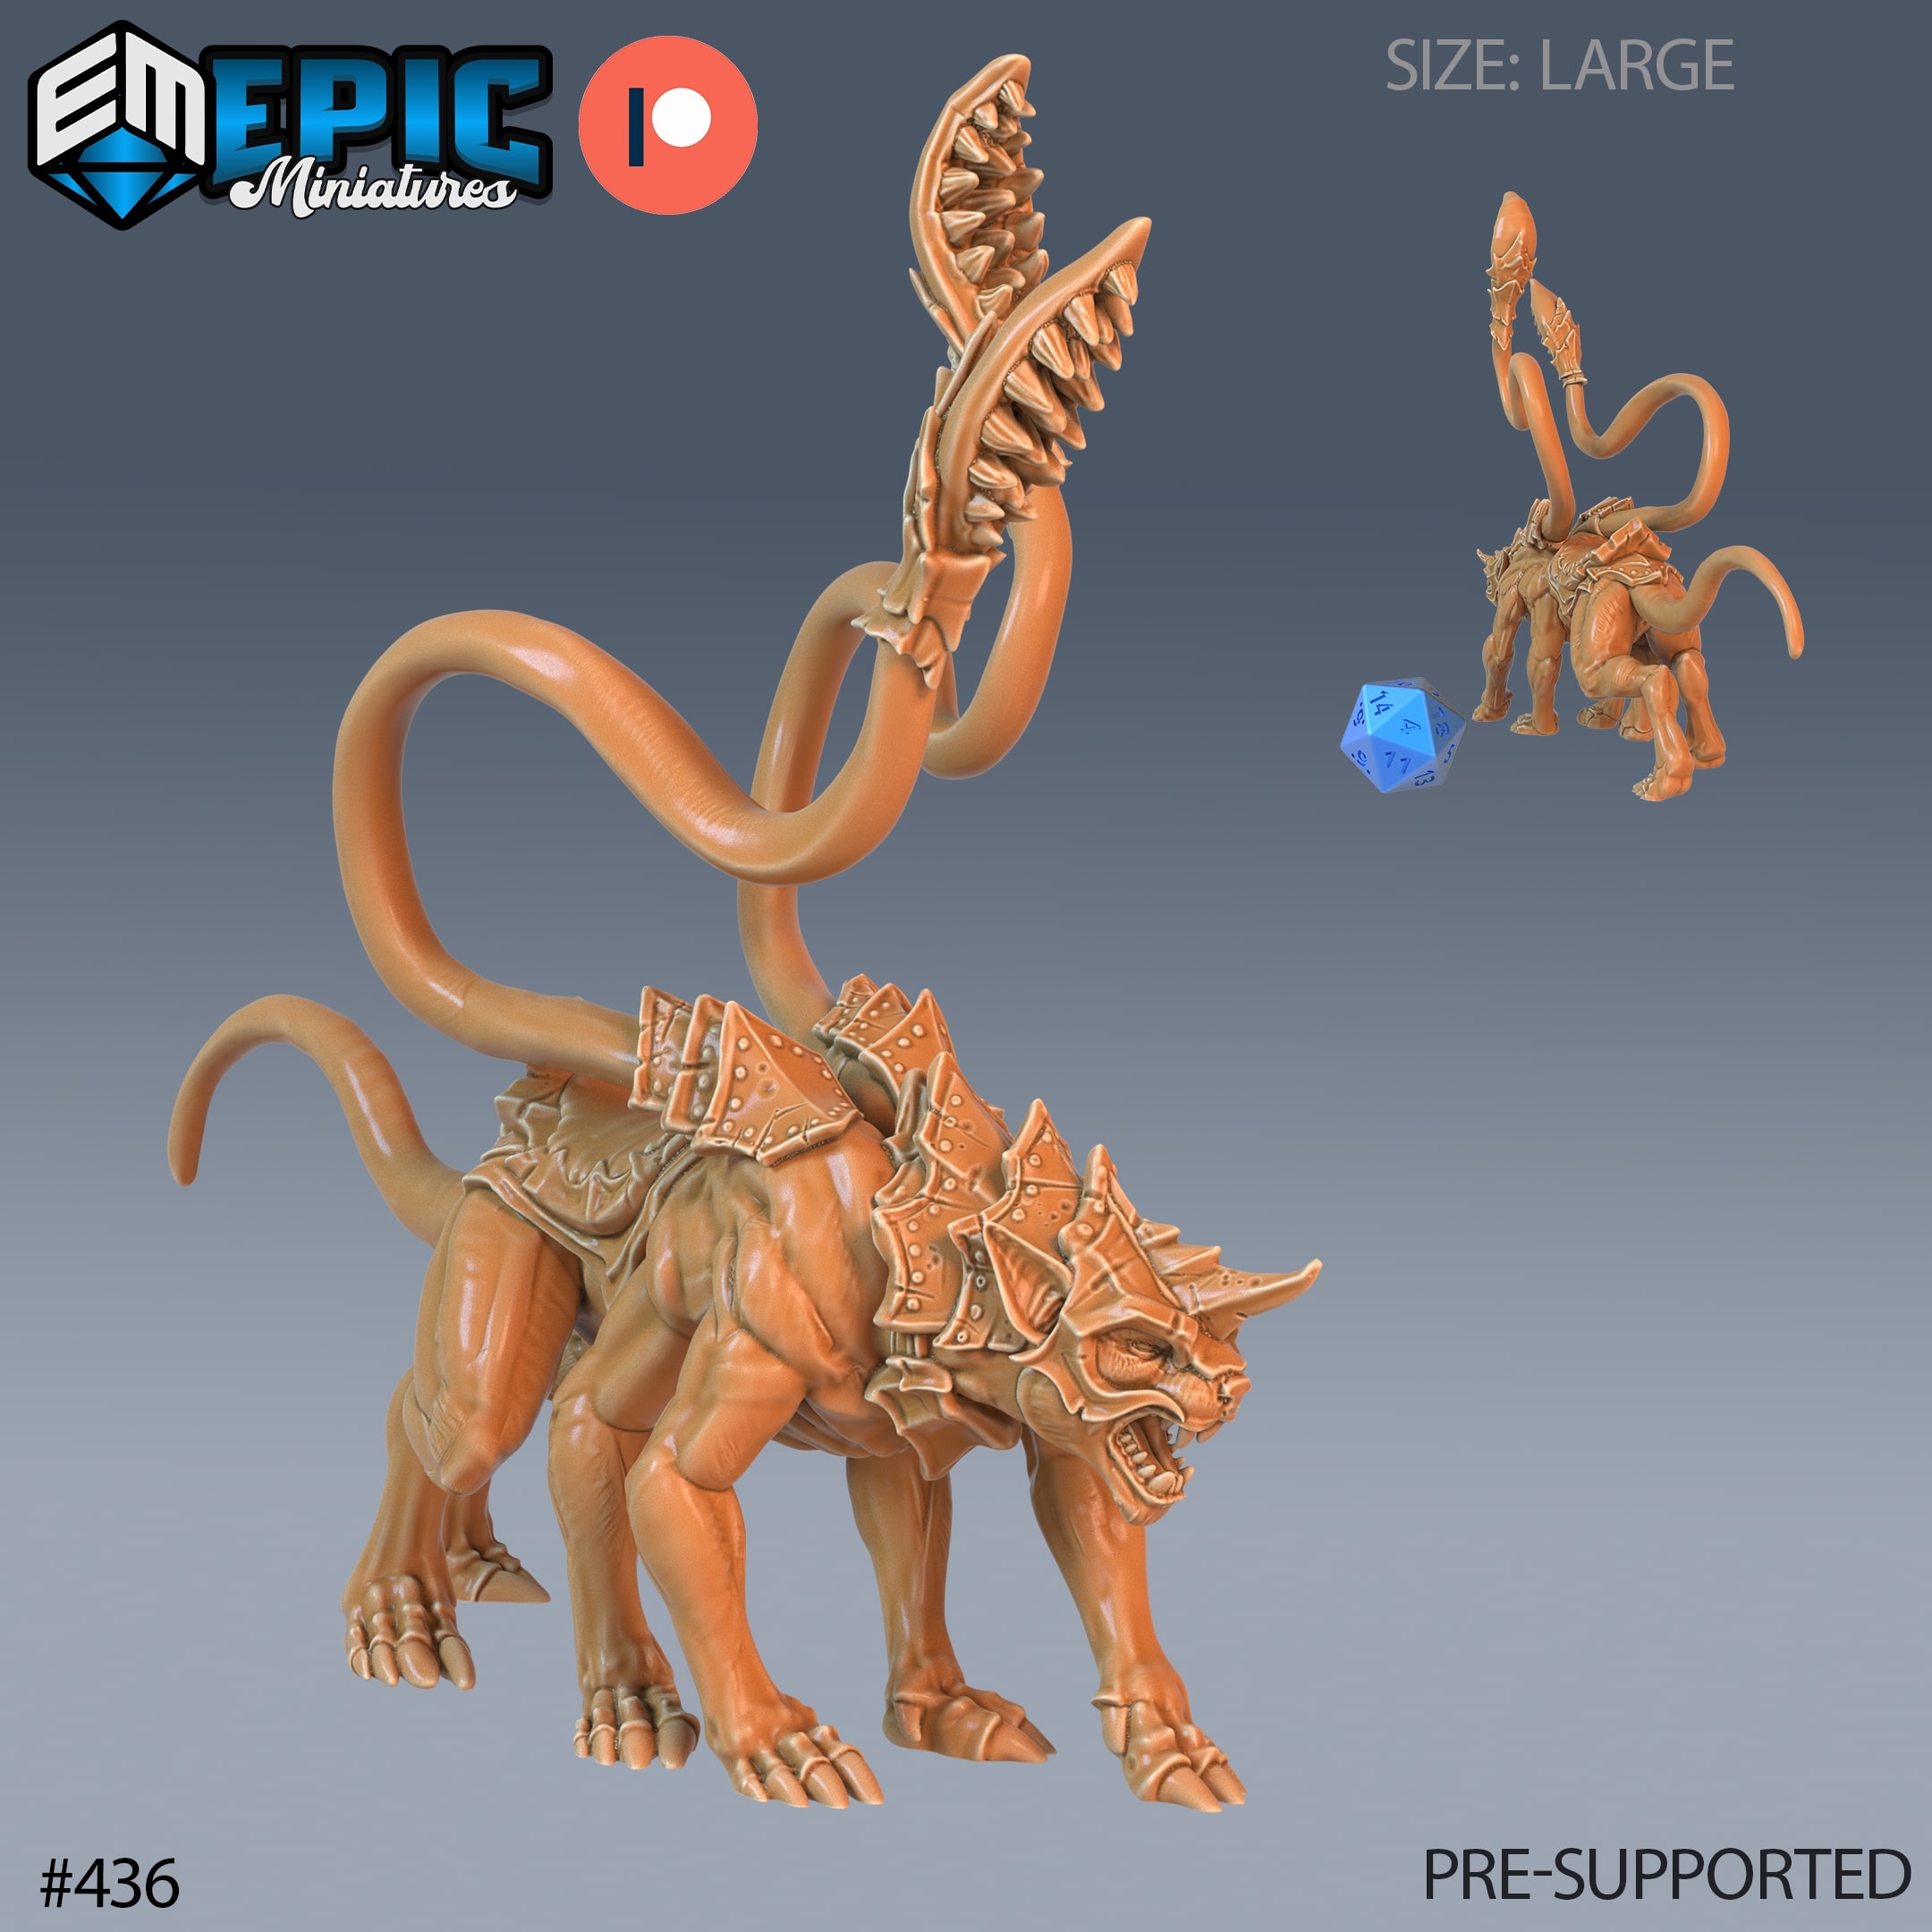 Cat like and puma like creature designed by Epic Miniatures